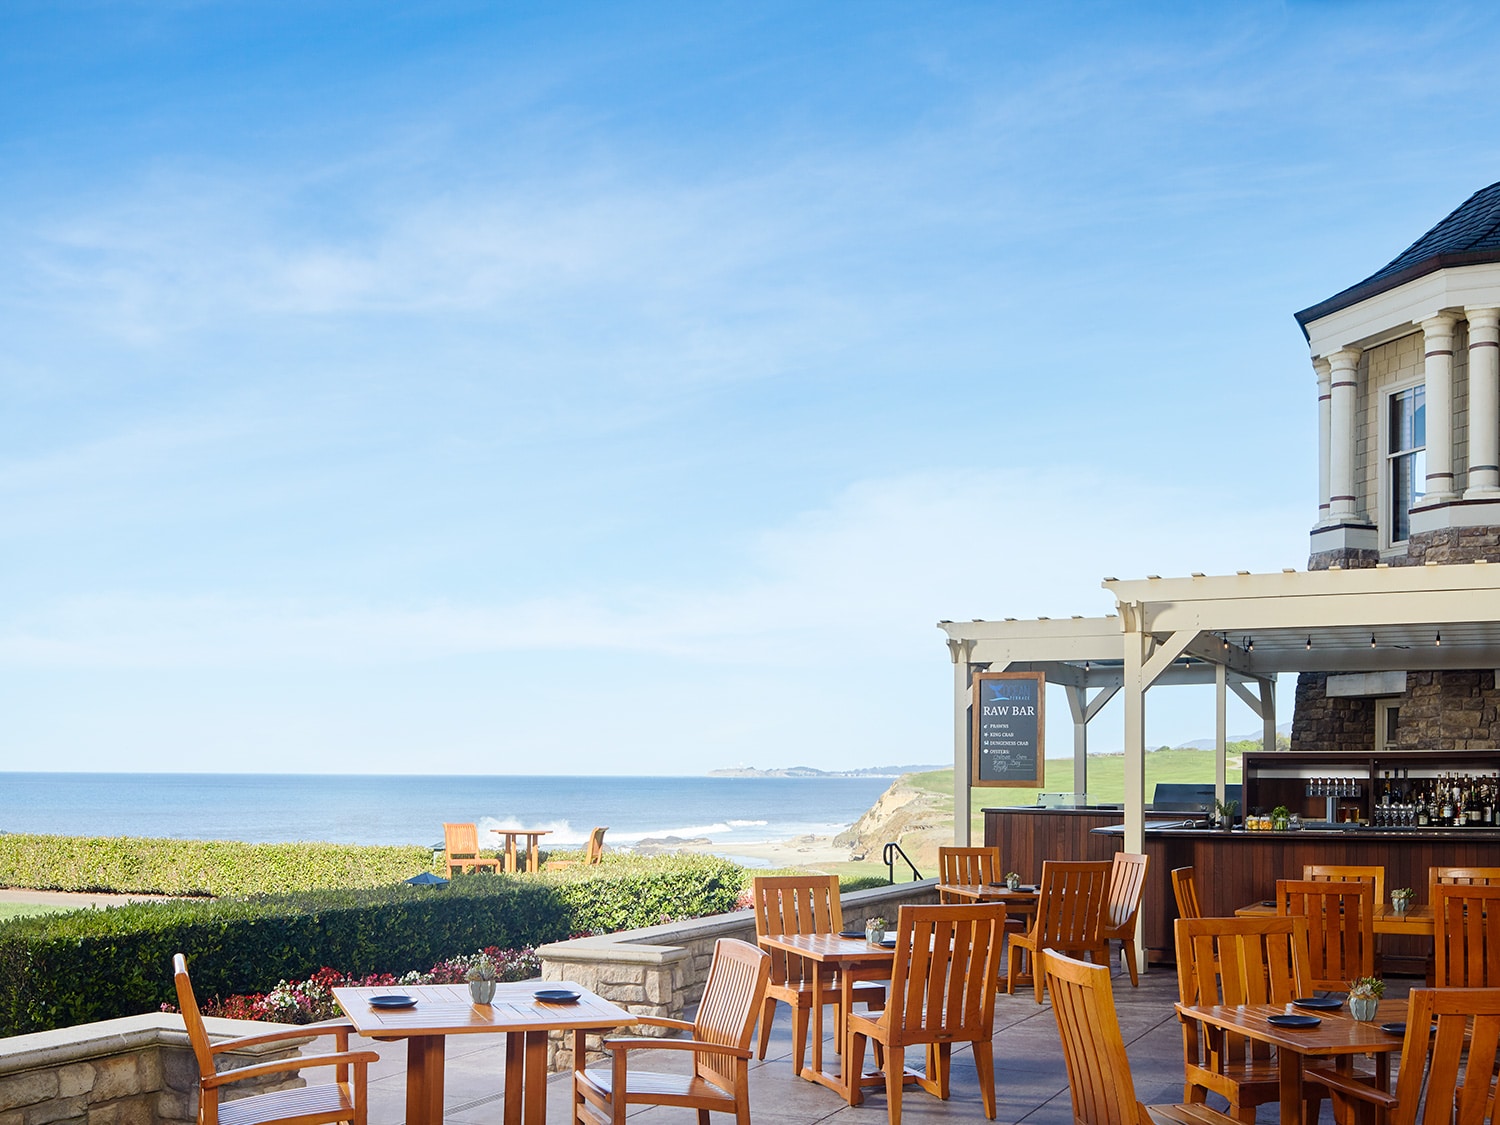 The view from the Ocean Terrace restaurant at The Ritz-Carlton Half Moon Bay resort in California.